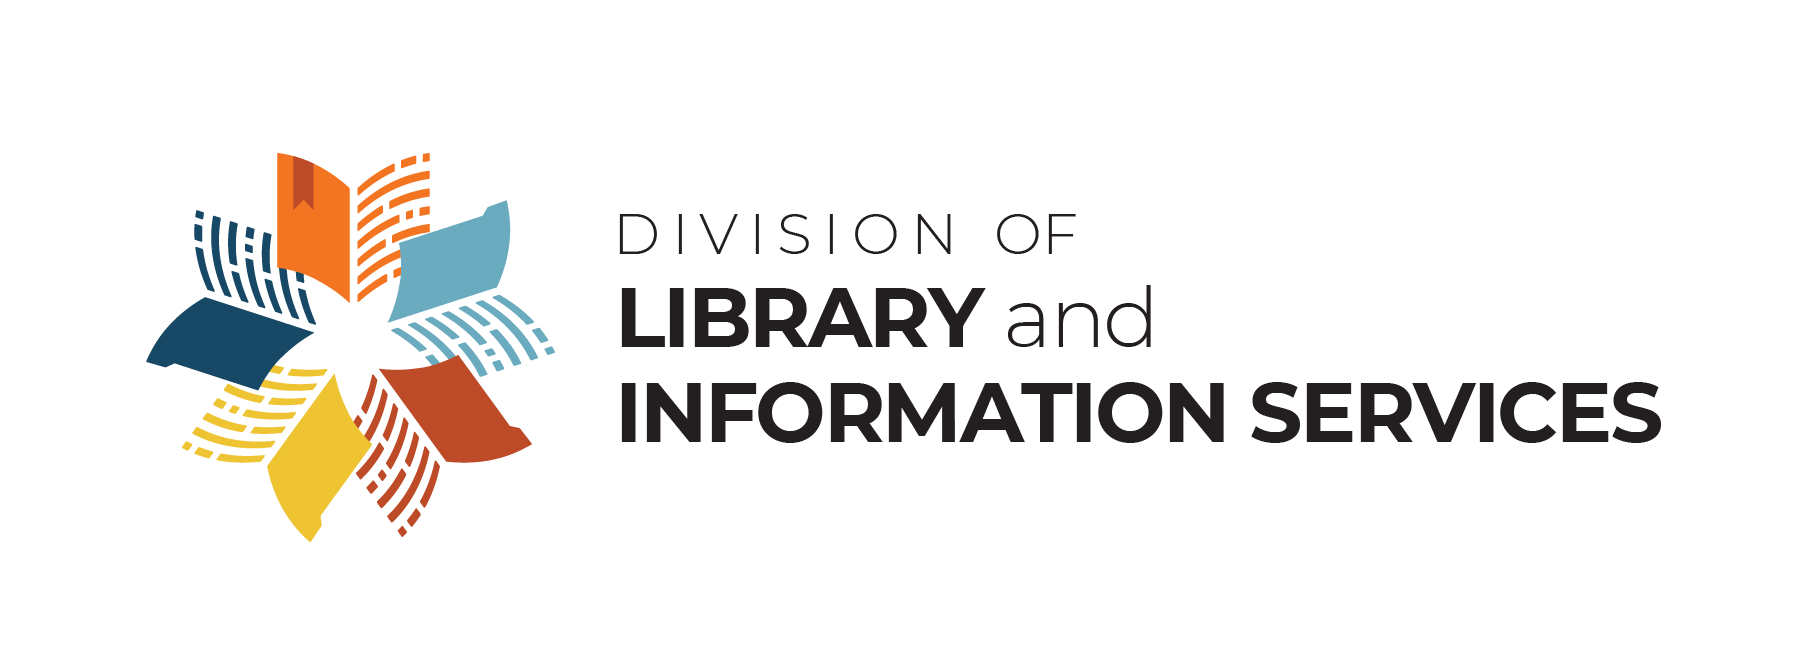 Division of Library and Information Services logo